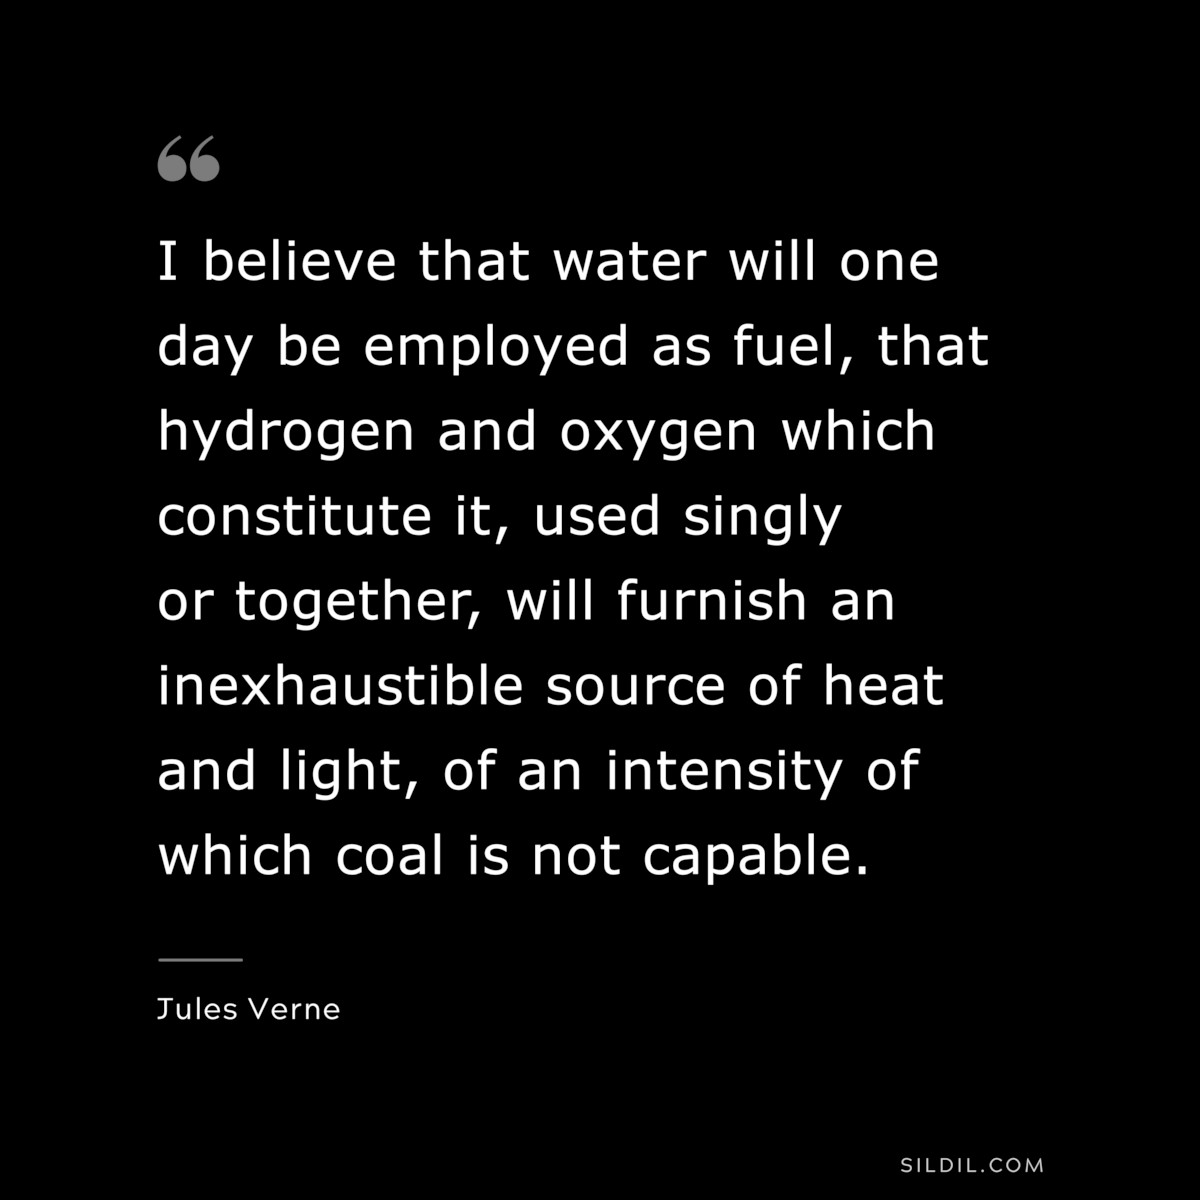 I believe that water will one day be employed as fuel, that hydrogen and oxygen which constitute it, used singly or together, will furnish an inexhaustible source of heat and light, of an intensity of which coal is not capable.